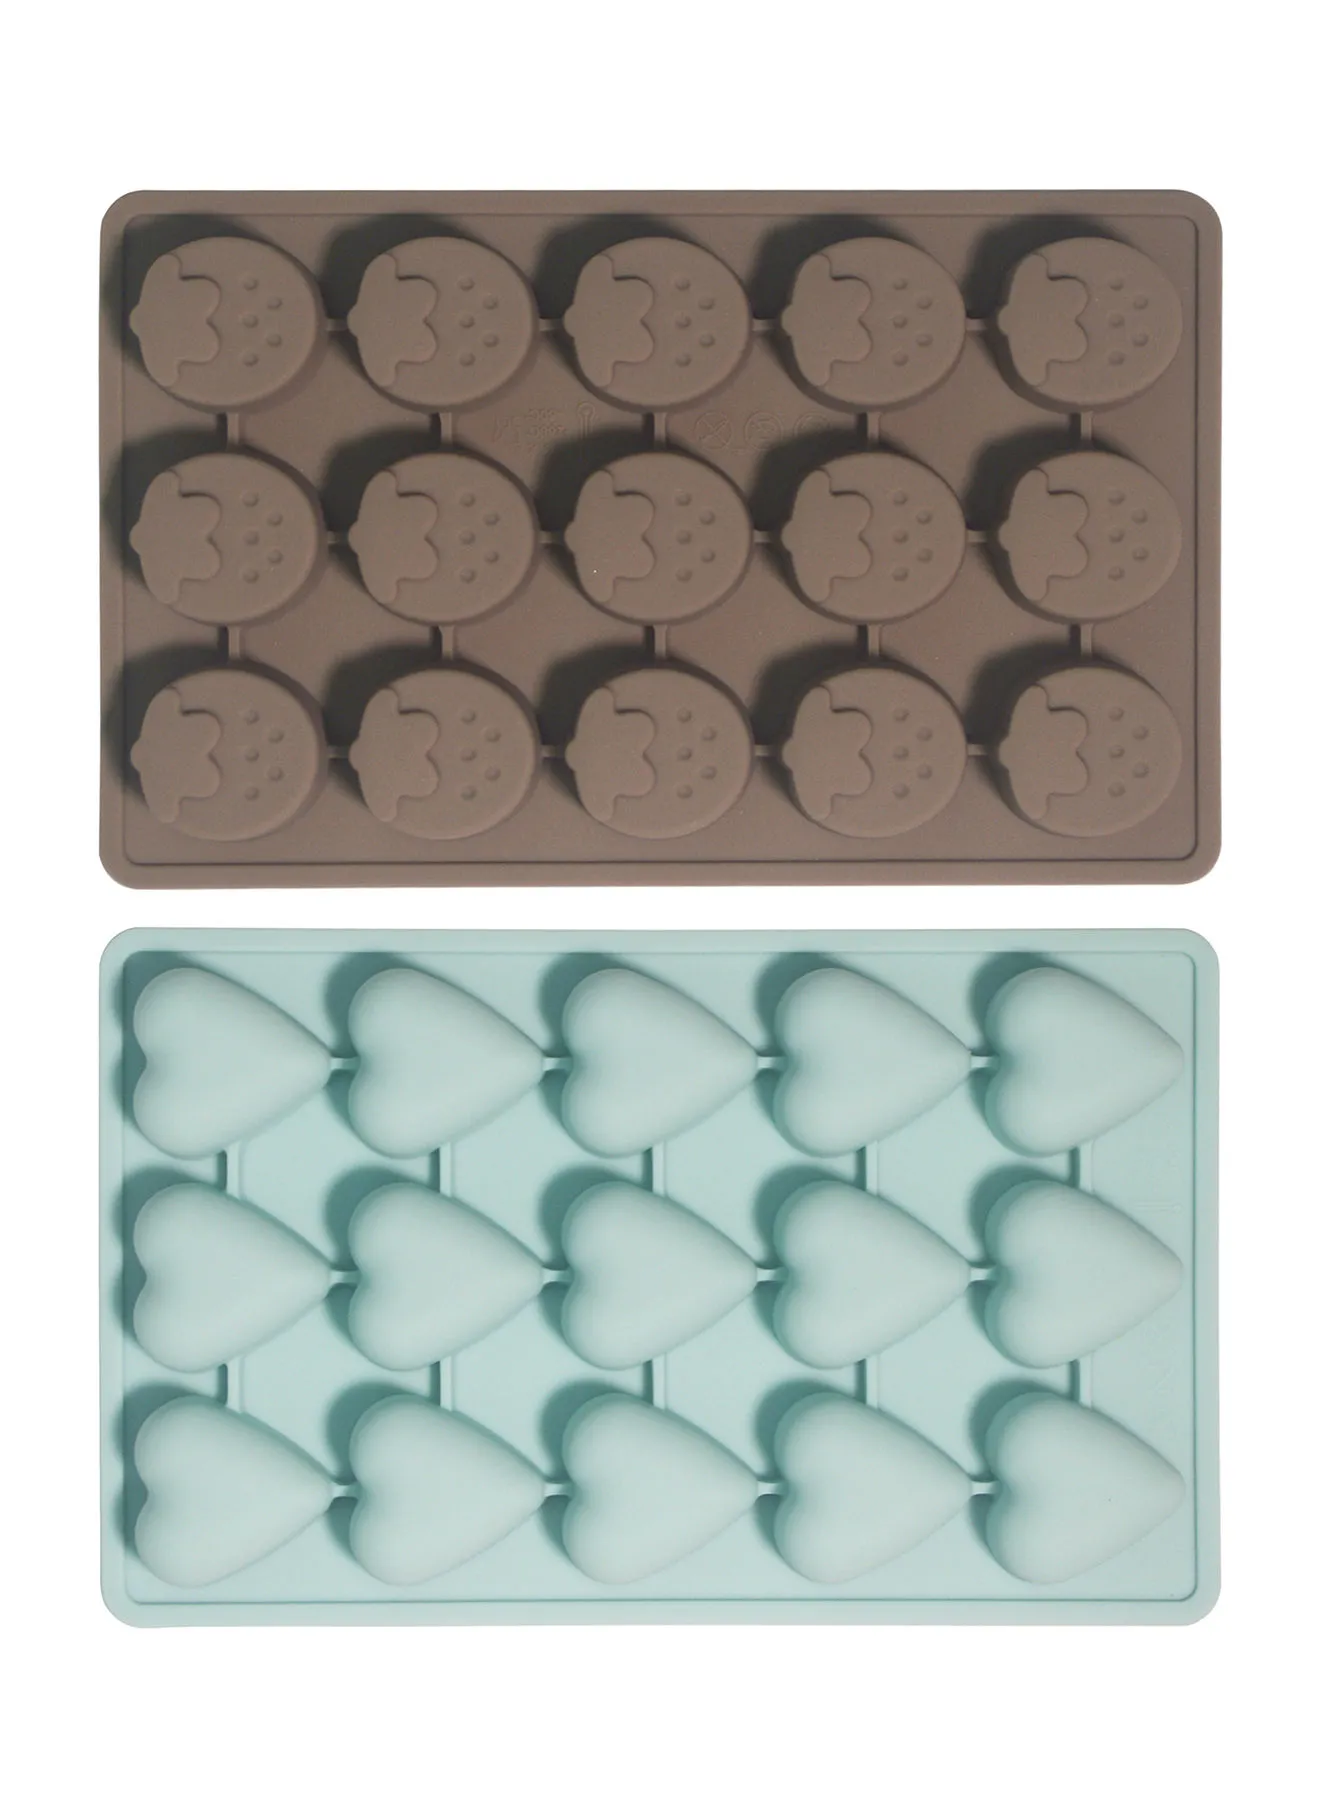 Amal 2 Trays Chocolate Molds - Hearts And Strawberries Shape - Silicone Molds - Cake Mold - Silicon Chocolate Molds - Blue/Grey